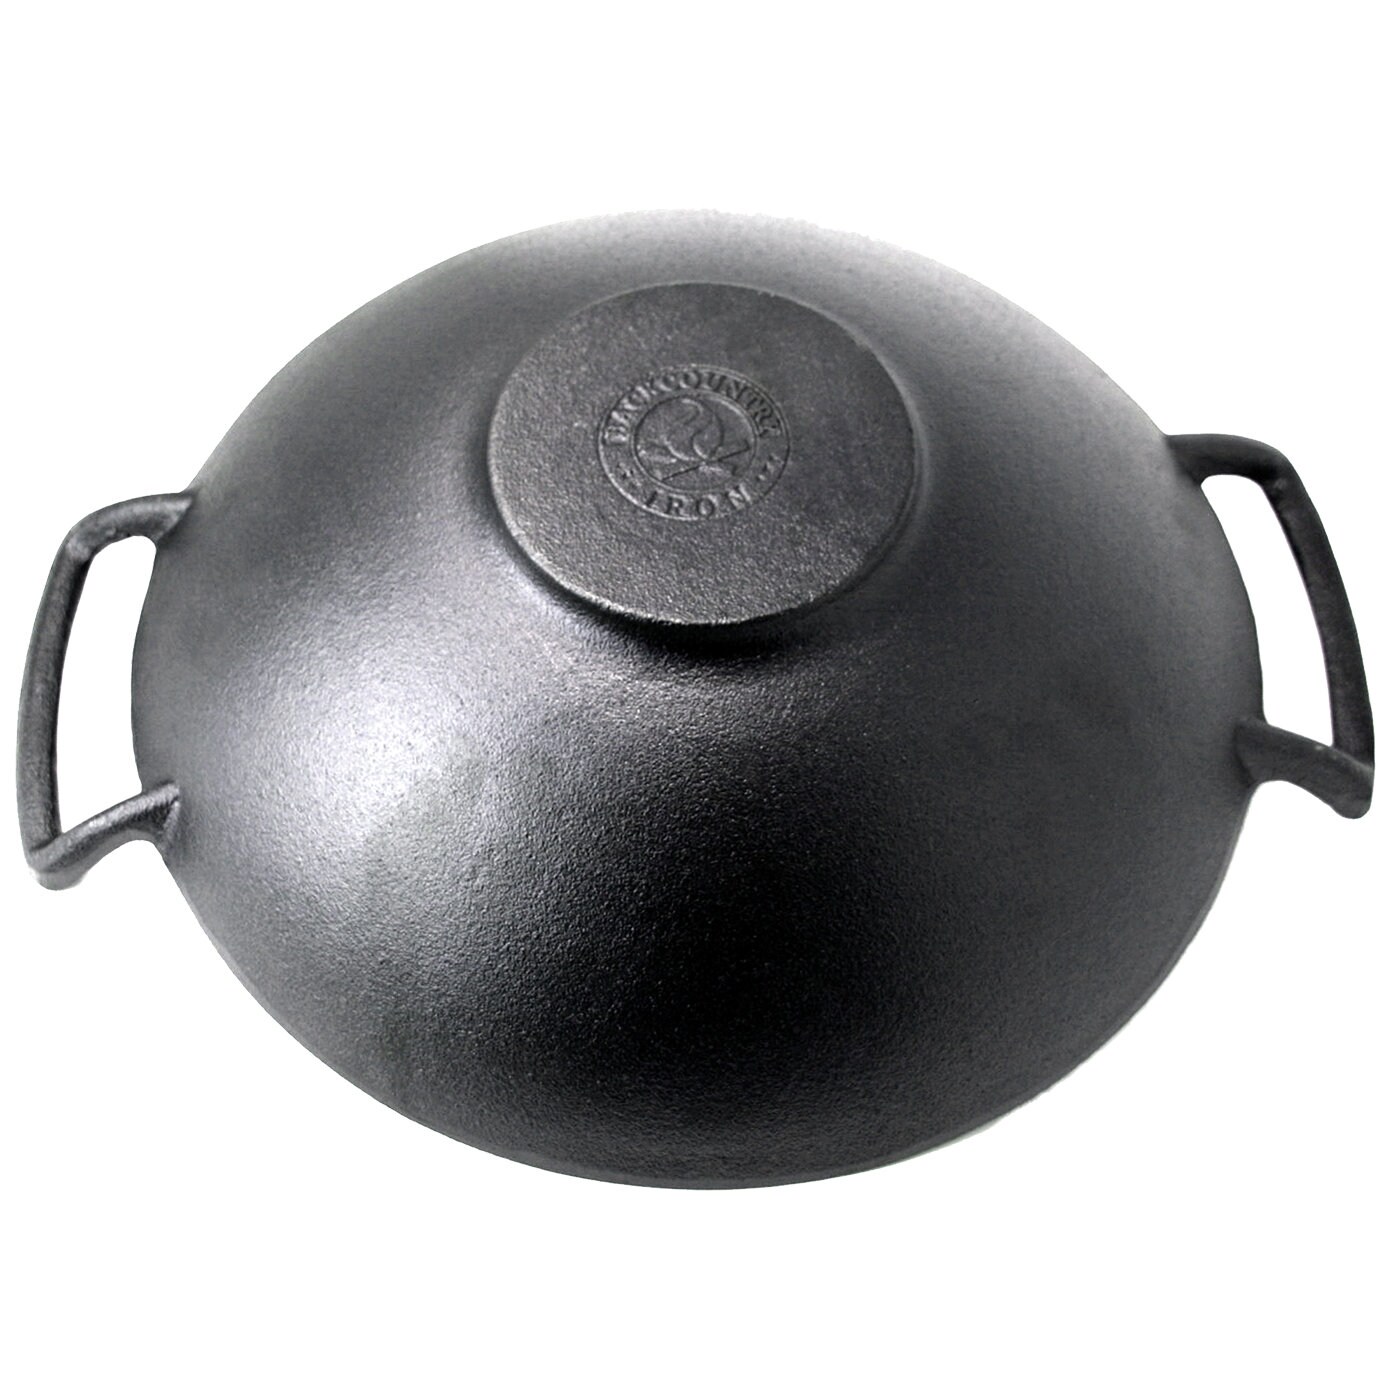 Backcountry Iron 14 Inch Cast Iron Wok With Flat Base and - Etsy